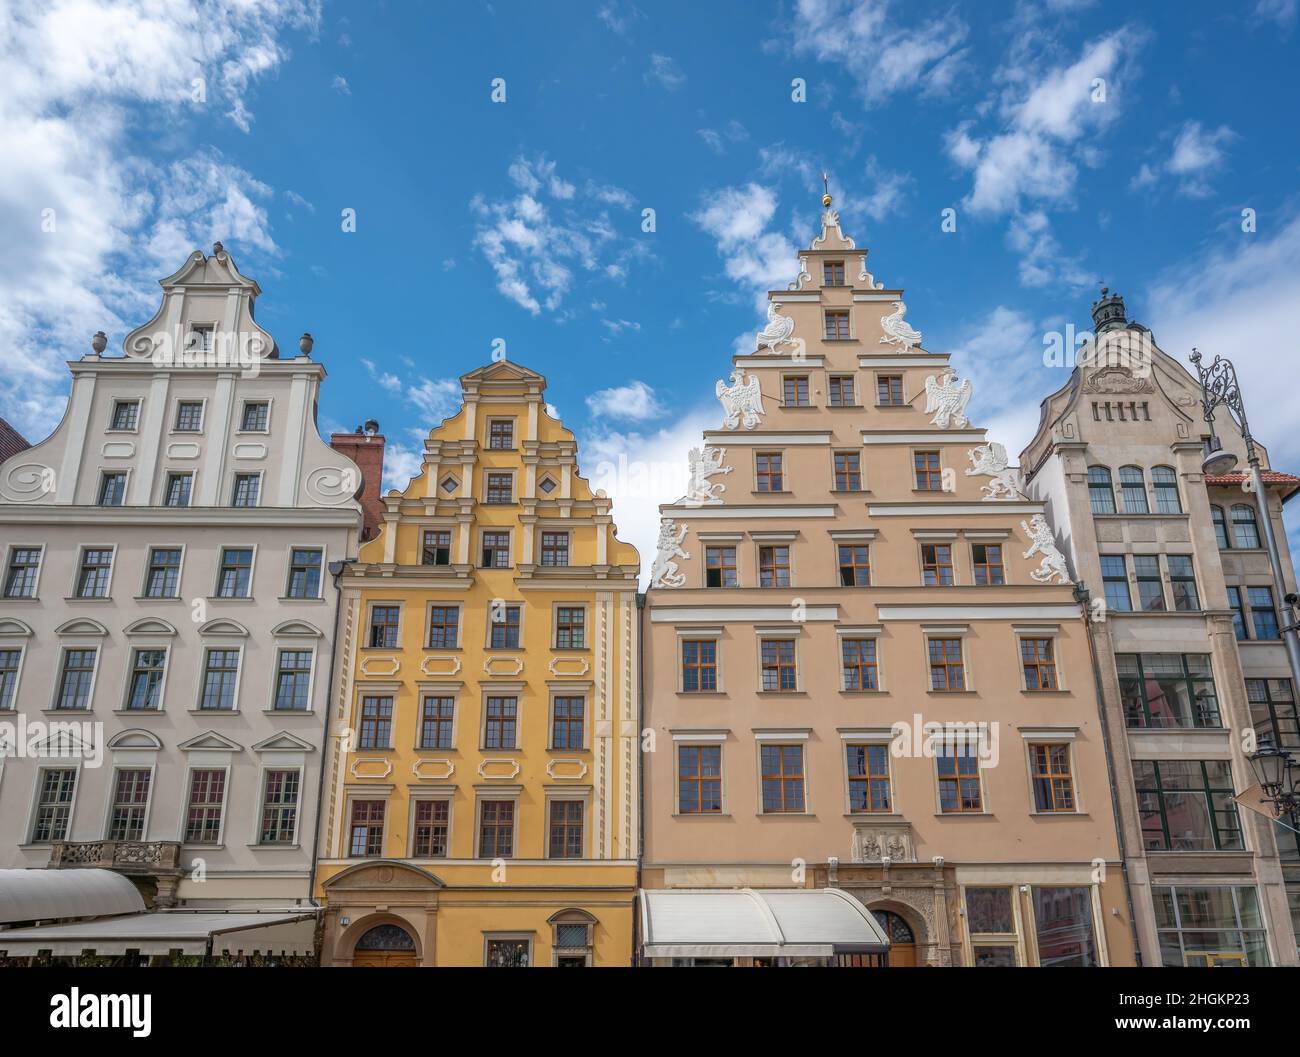 Colorful town houses buildings at Market Square (Rynek Square) - Wroclaw, Poland Stock Photo